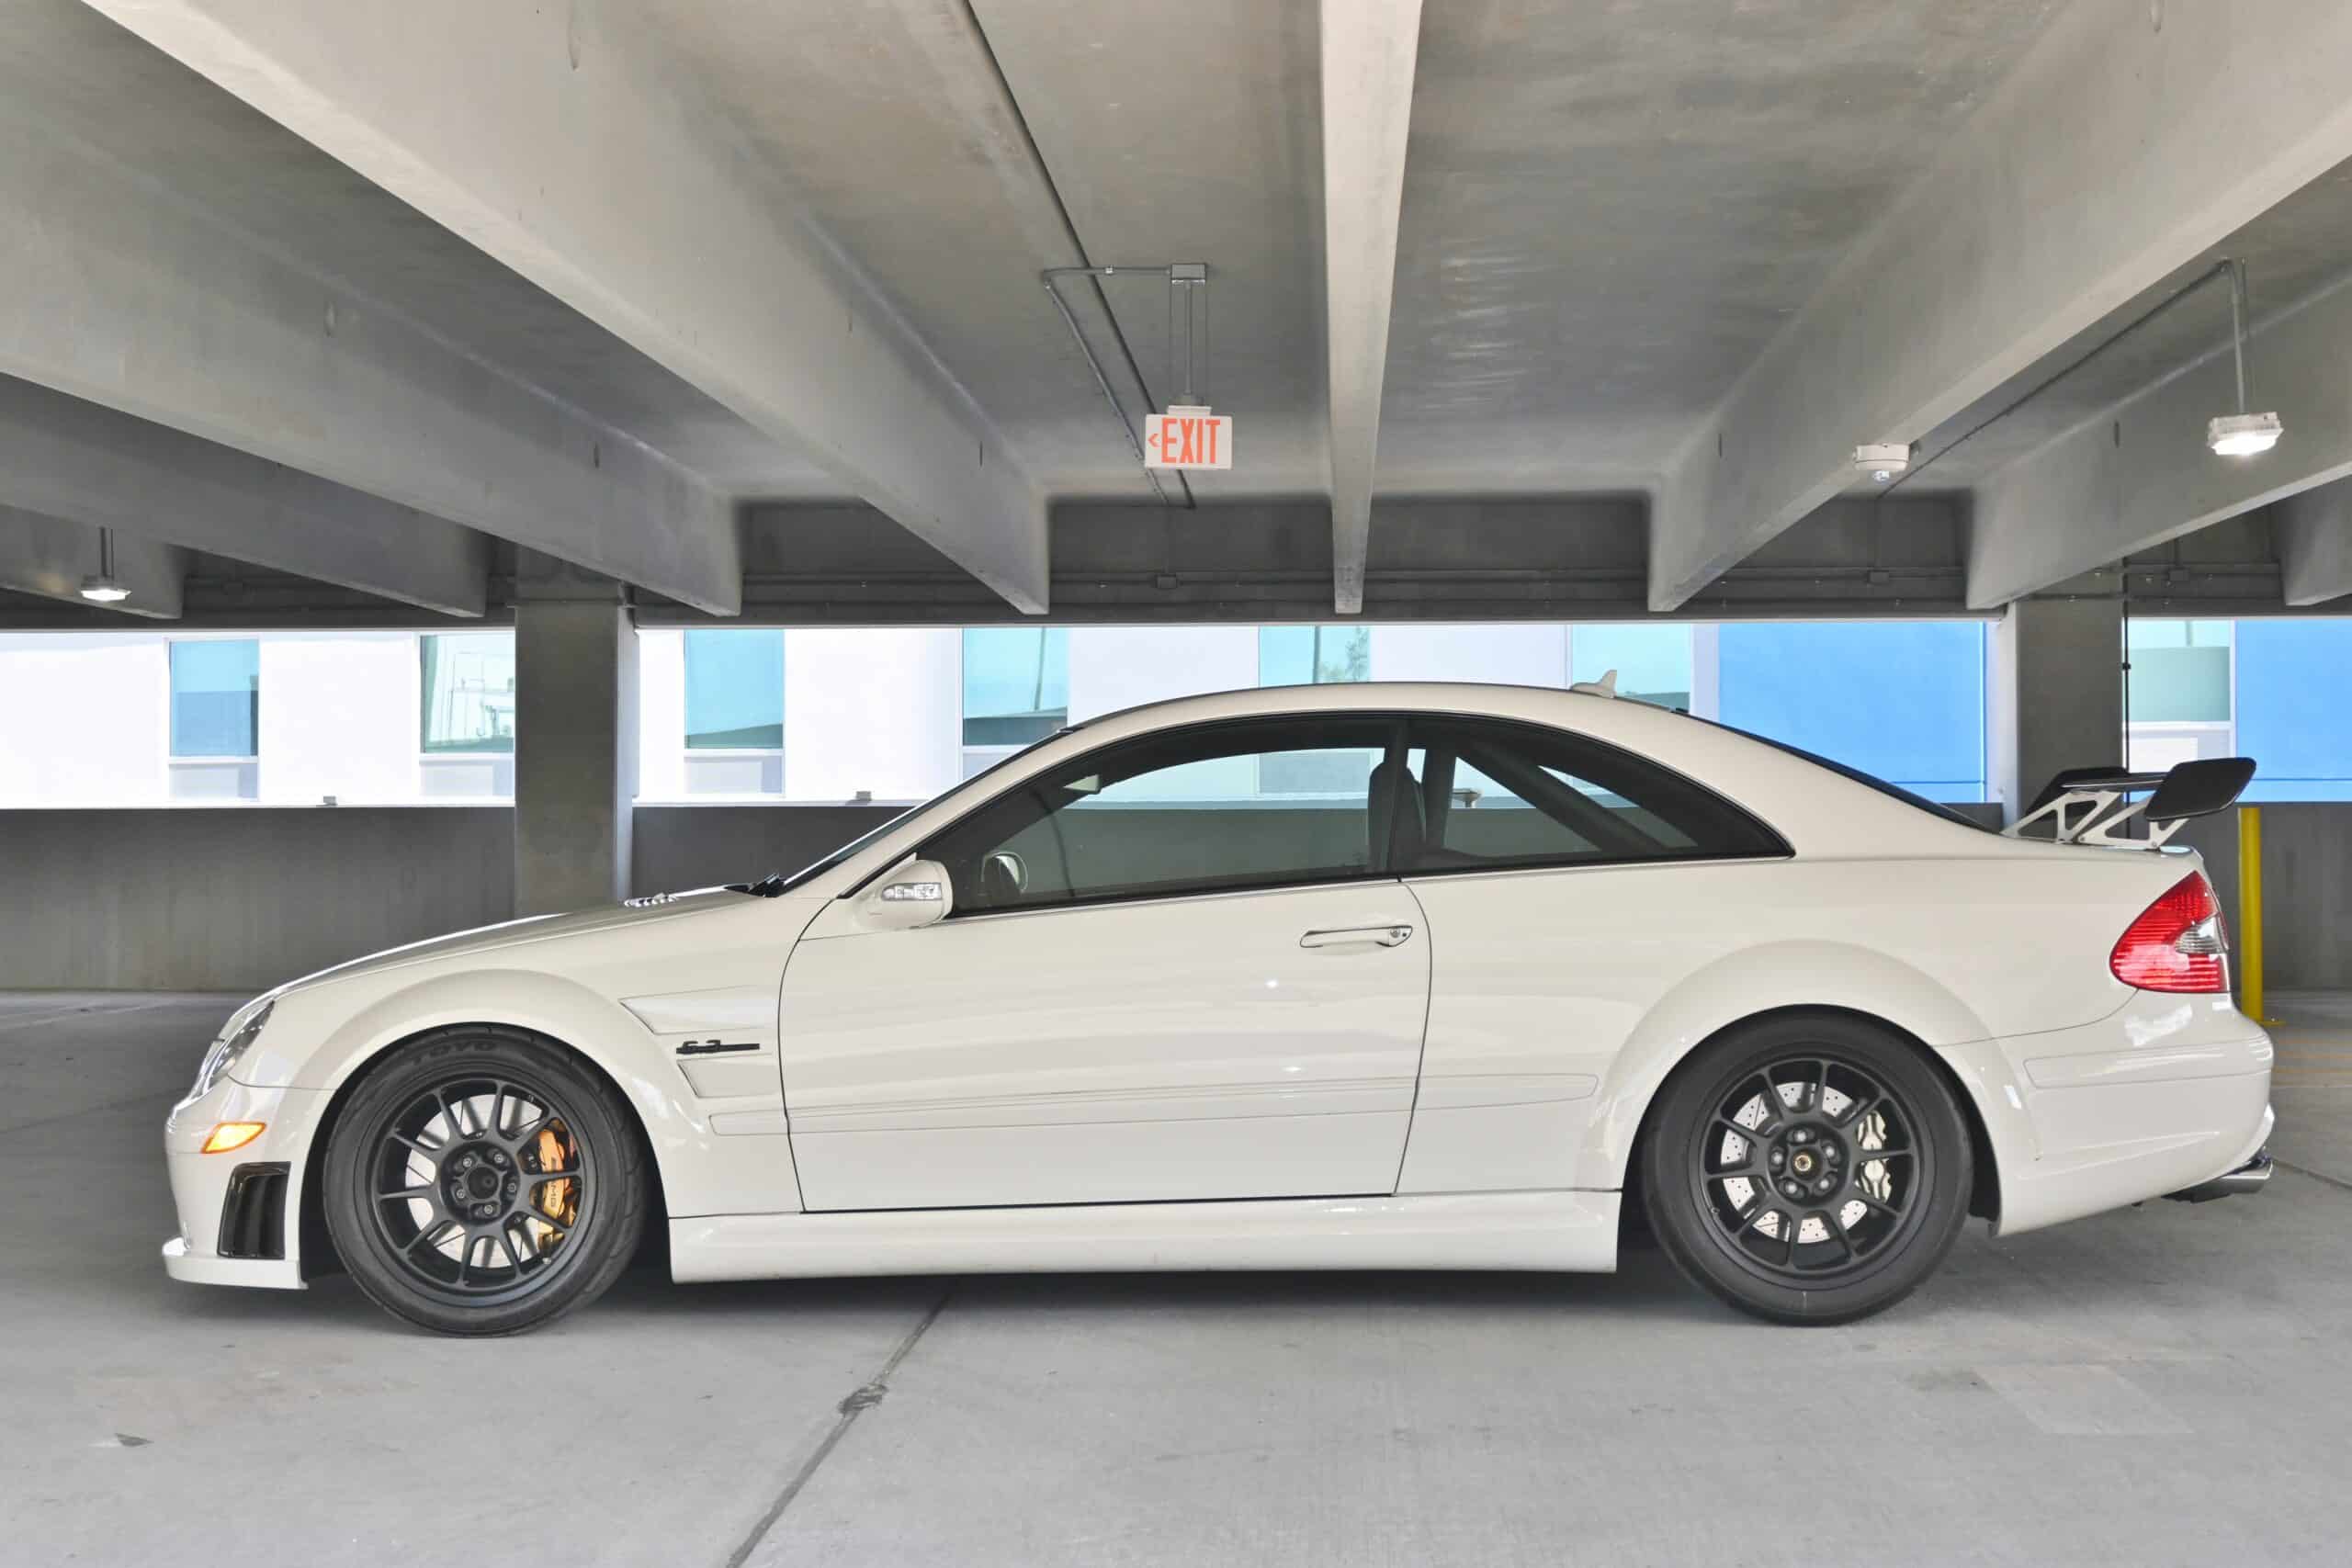 2008 Mercedes-Benz CLK63 Black Series Weistec Supercharged-700HP-Only 23K Miles-Fully Documented-Over $60k in receipts